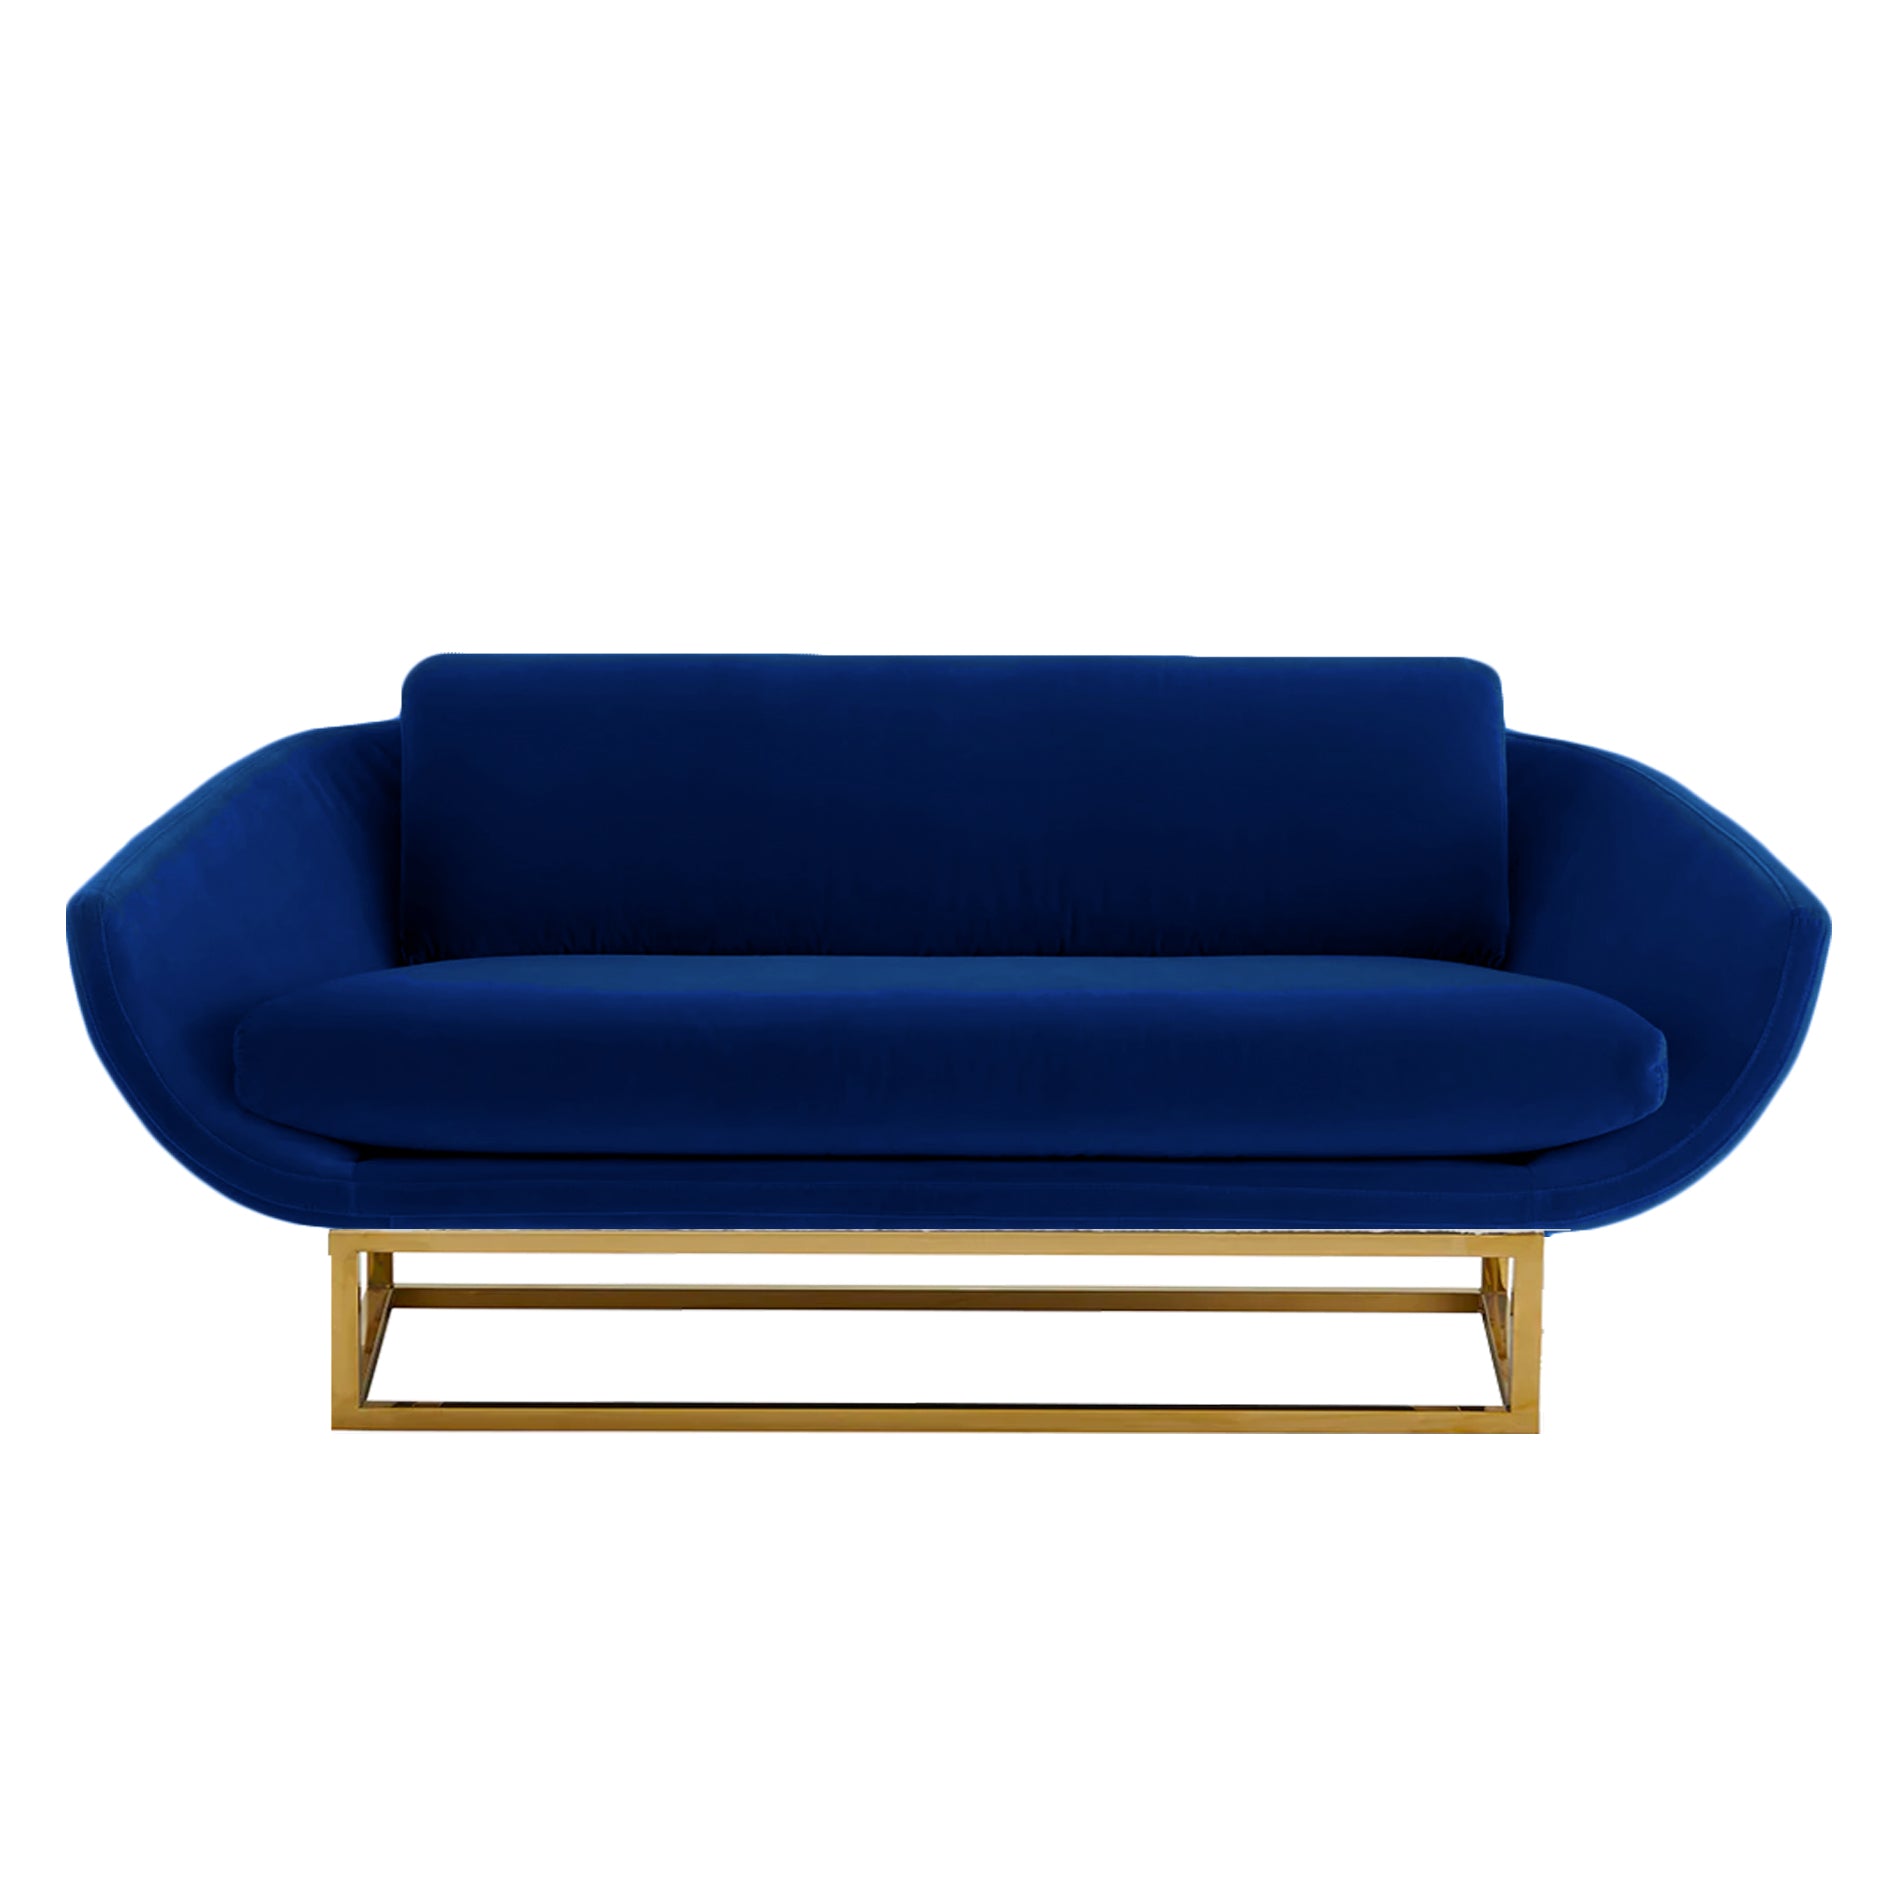 contemporary upholstery sofa with metal base, perfect for luxurious event seating.